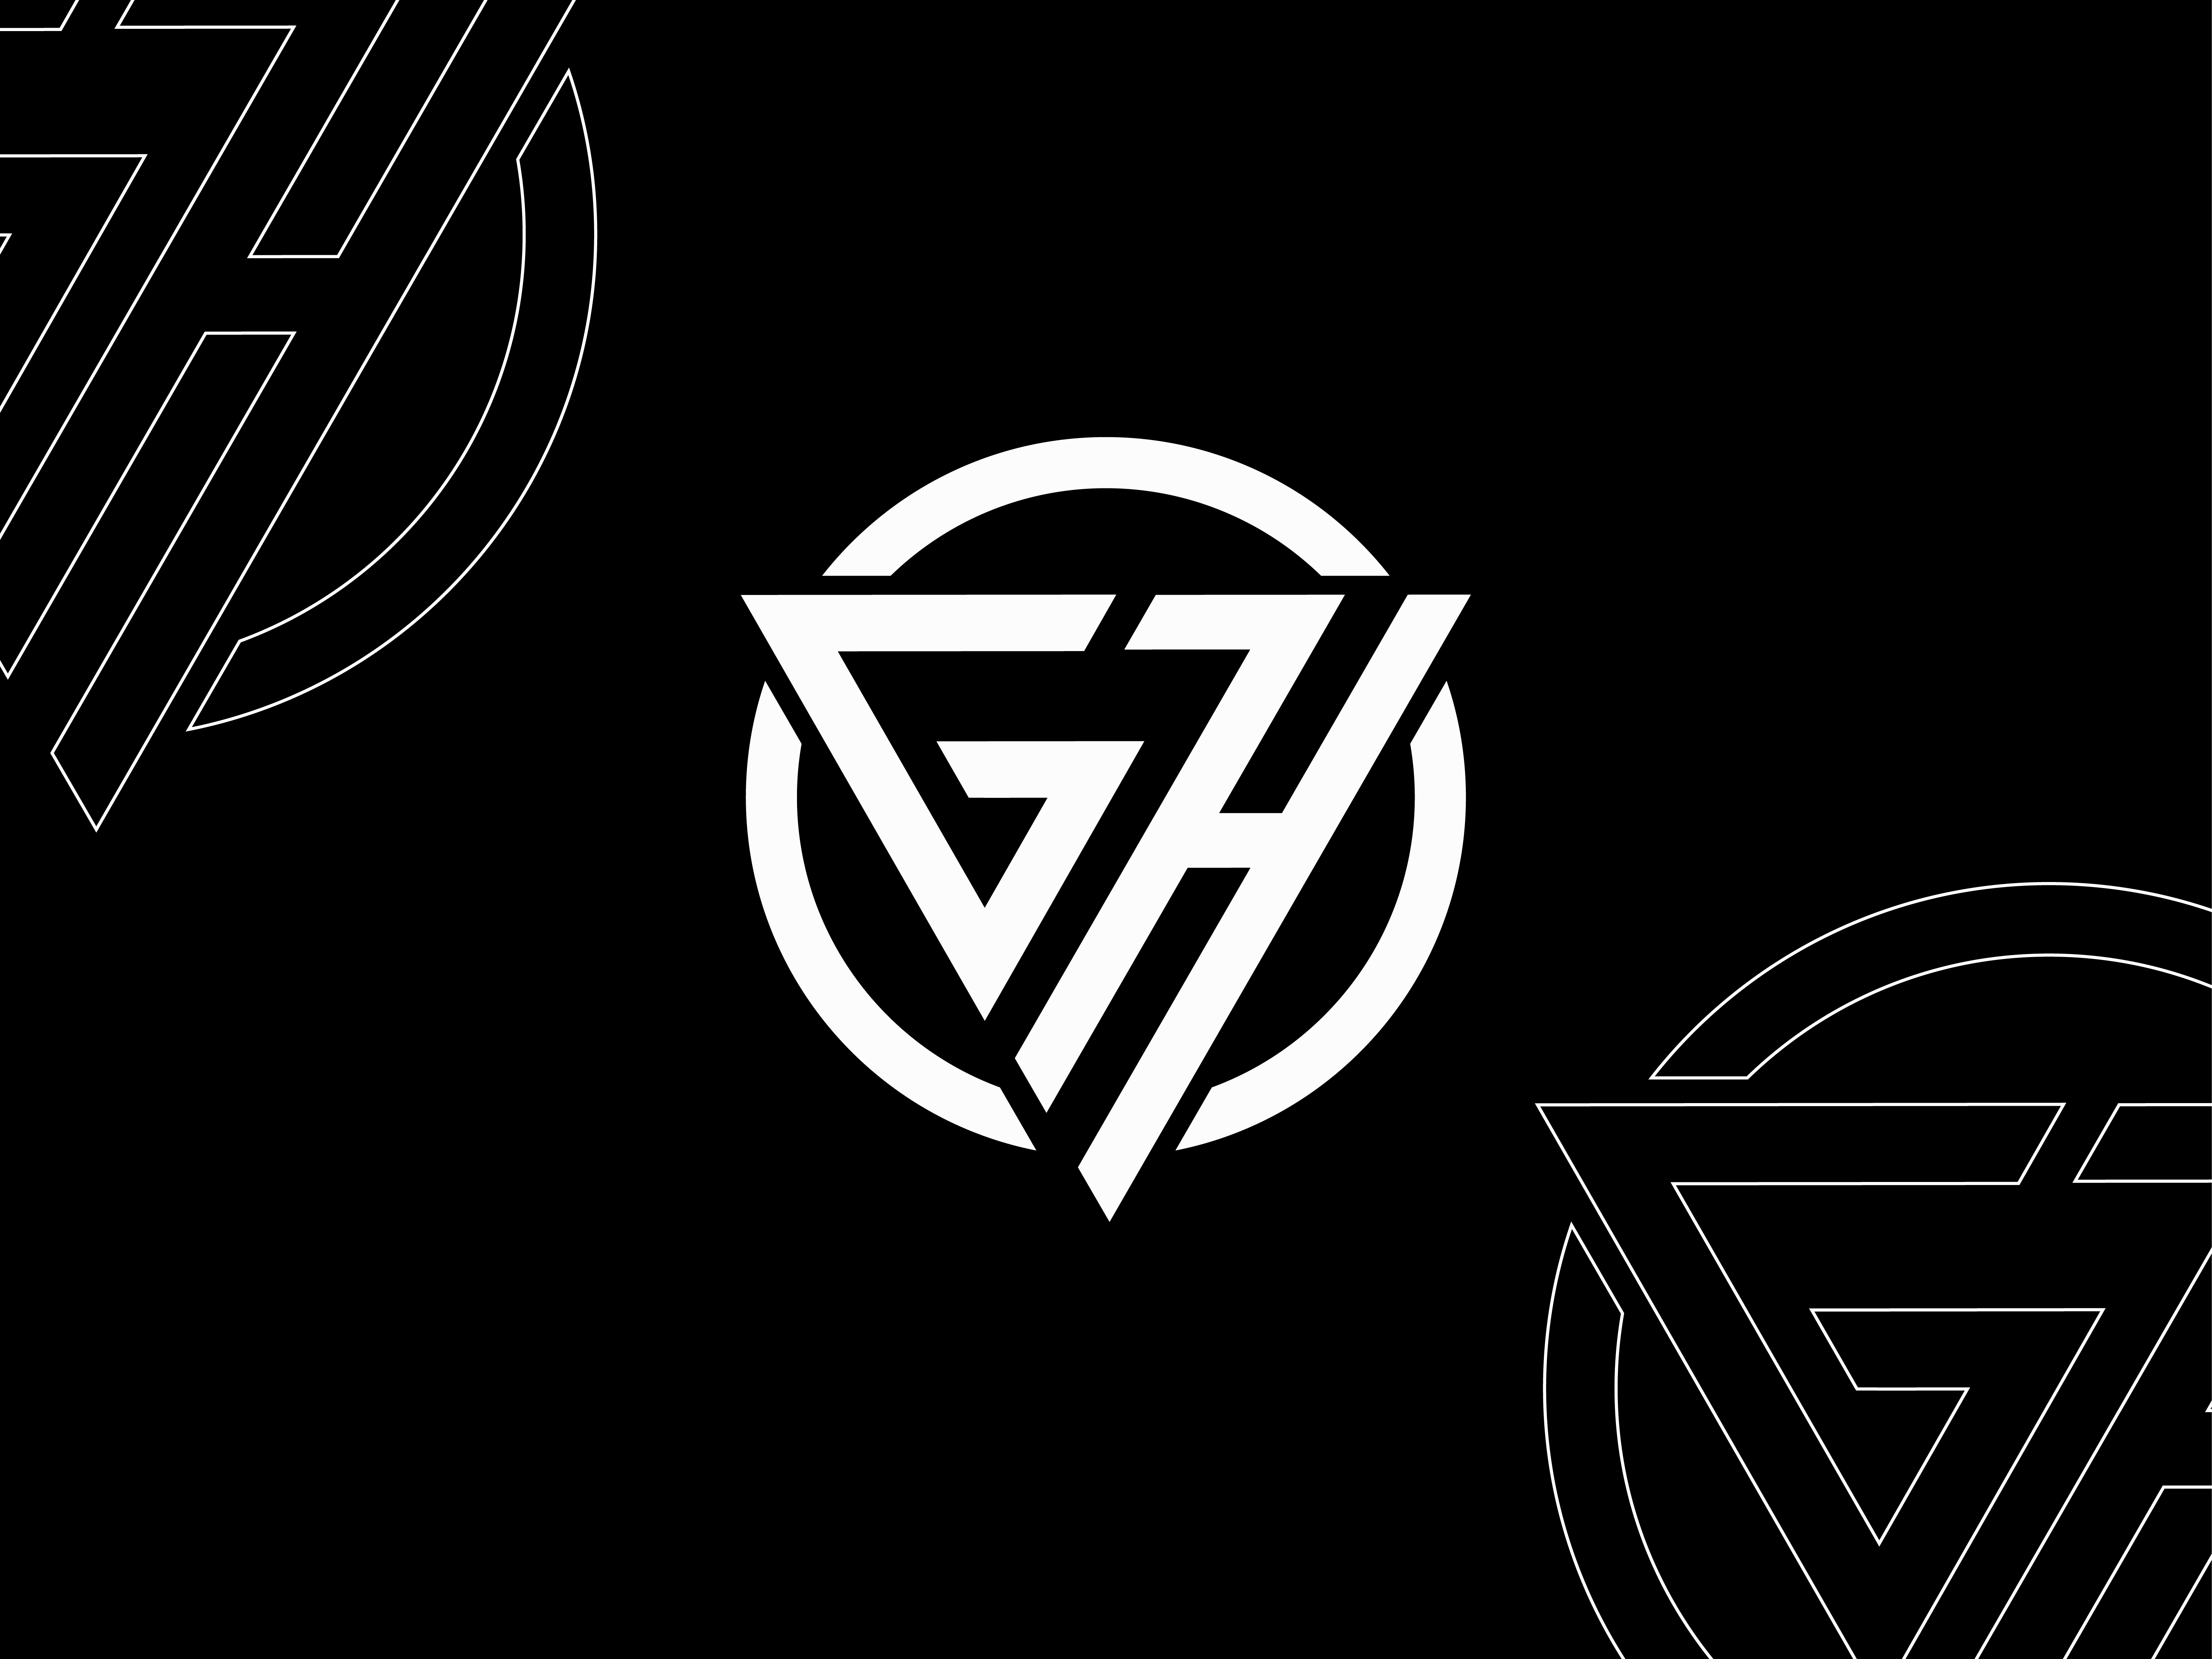 Premium Vector | A black and white logo for a company called gh